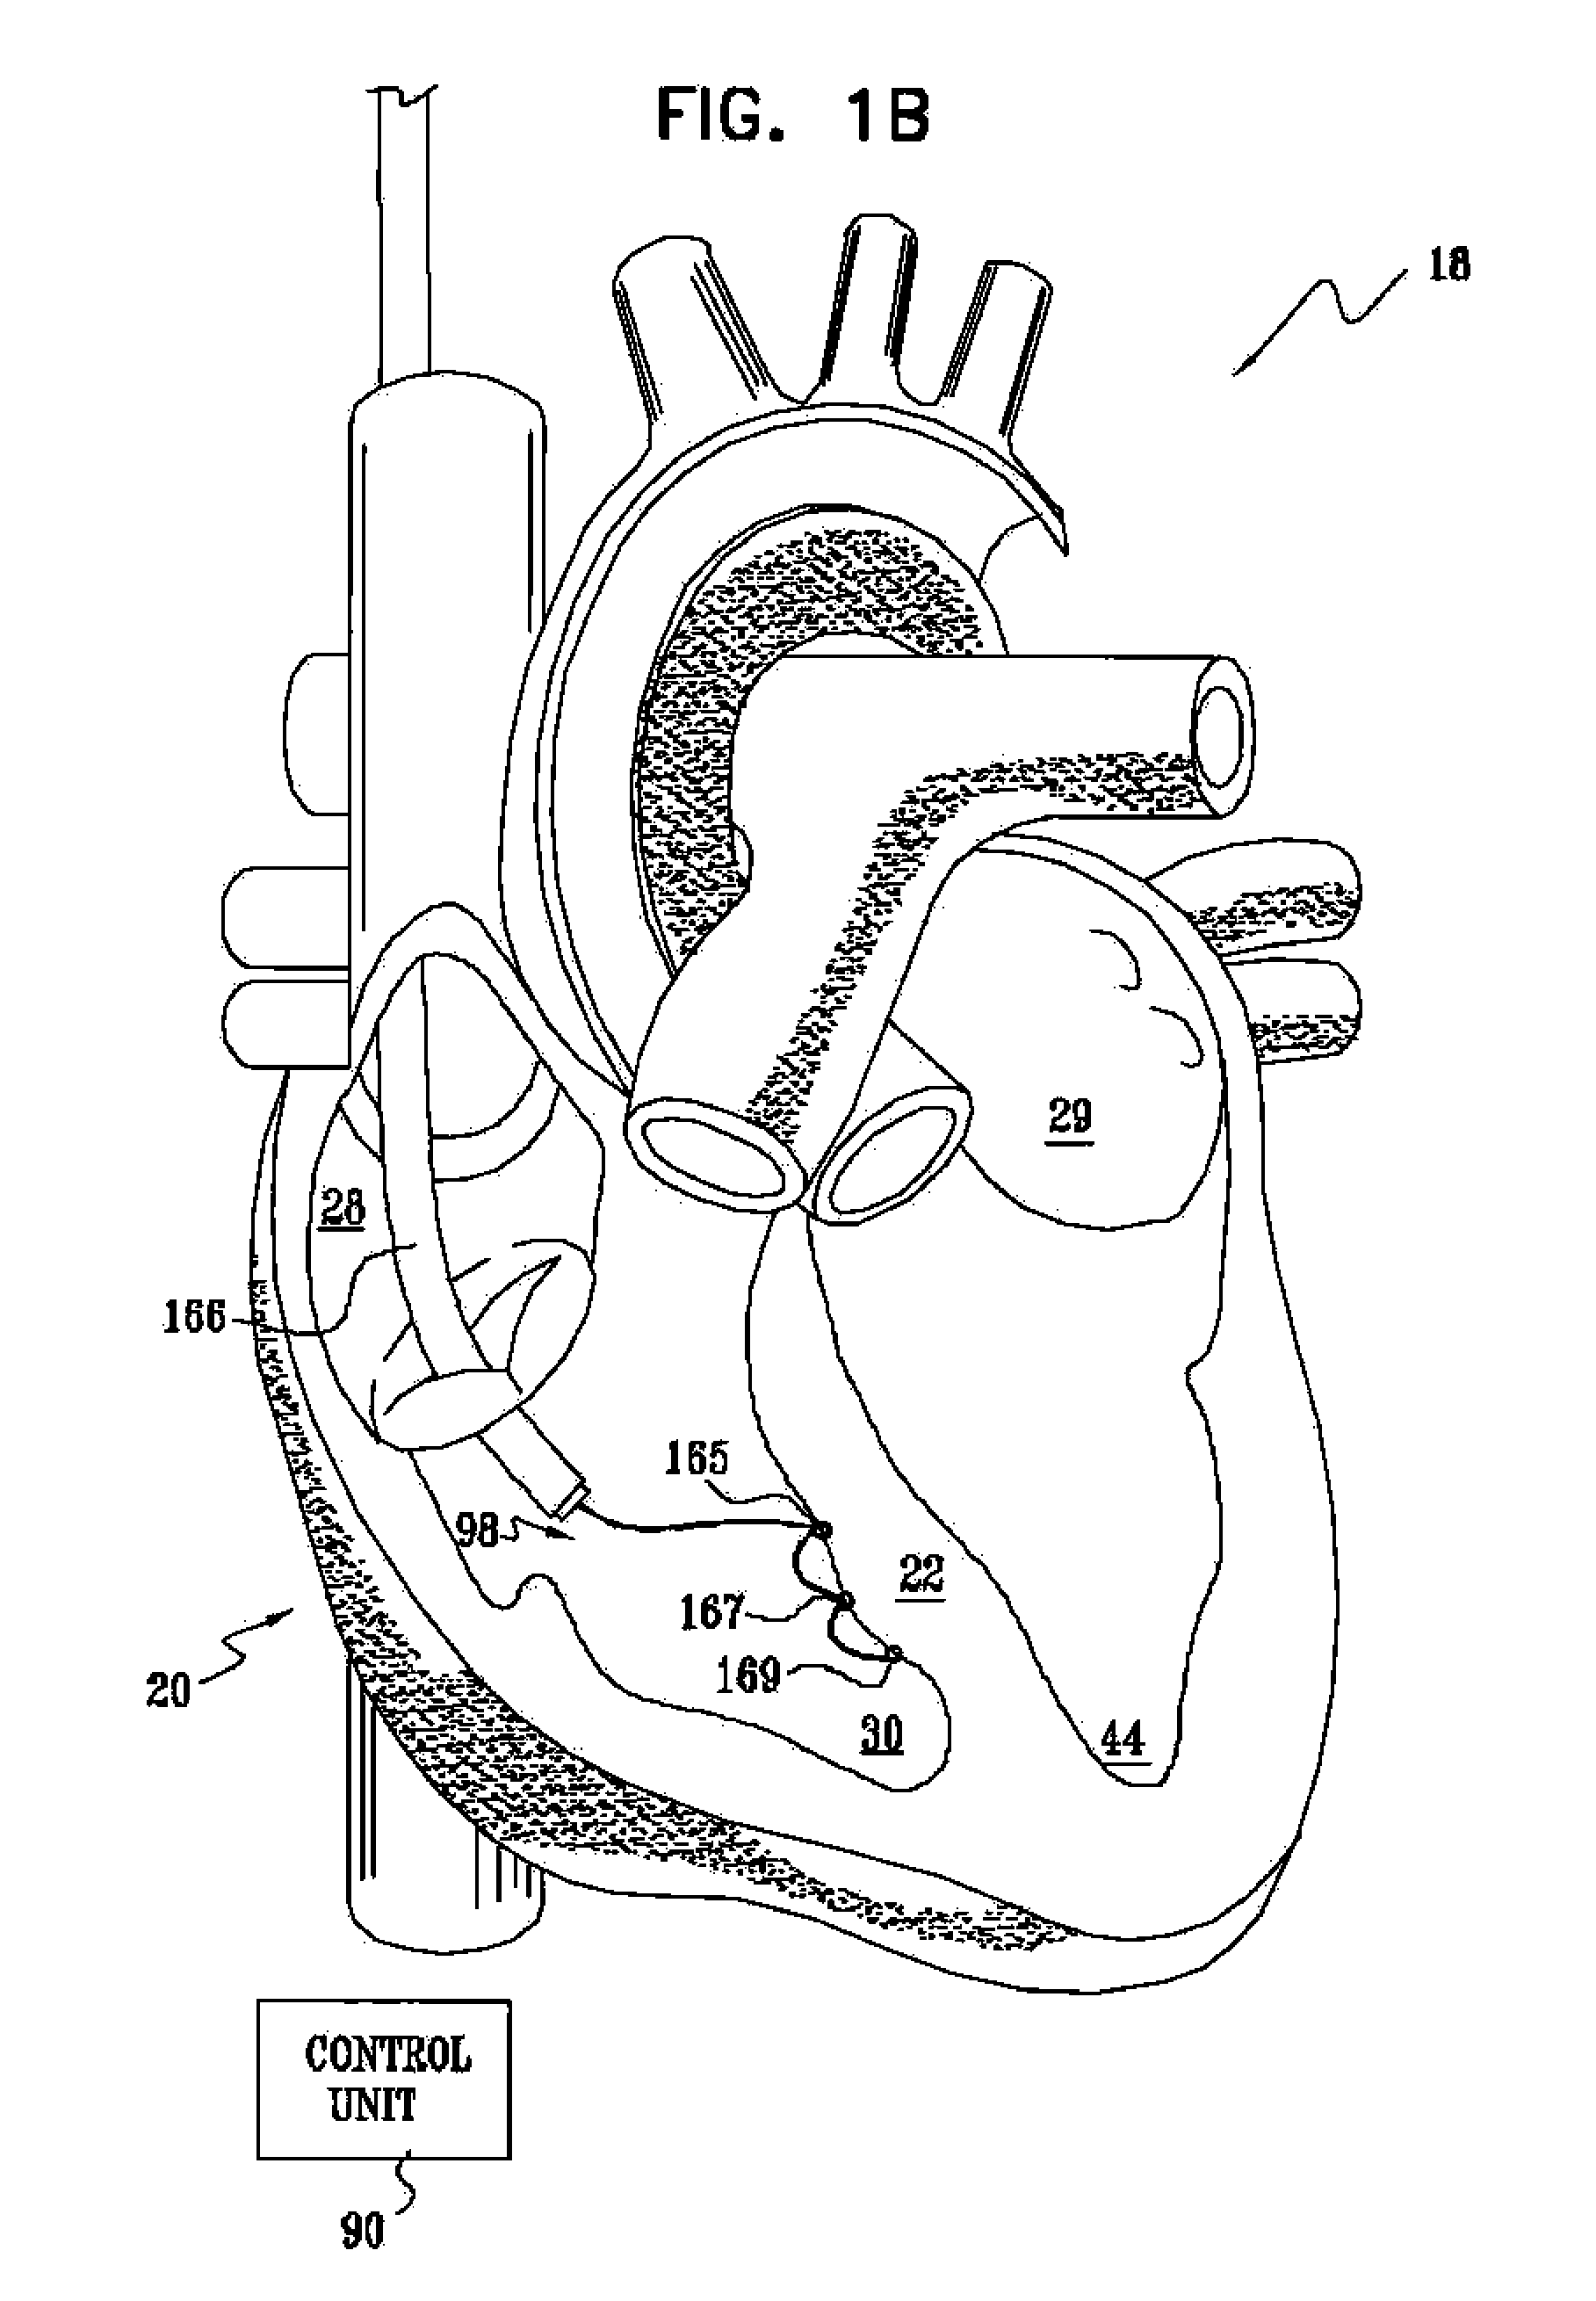 Signal Delivery Through The Right Ventricular Septum